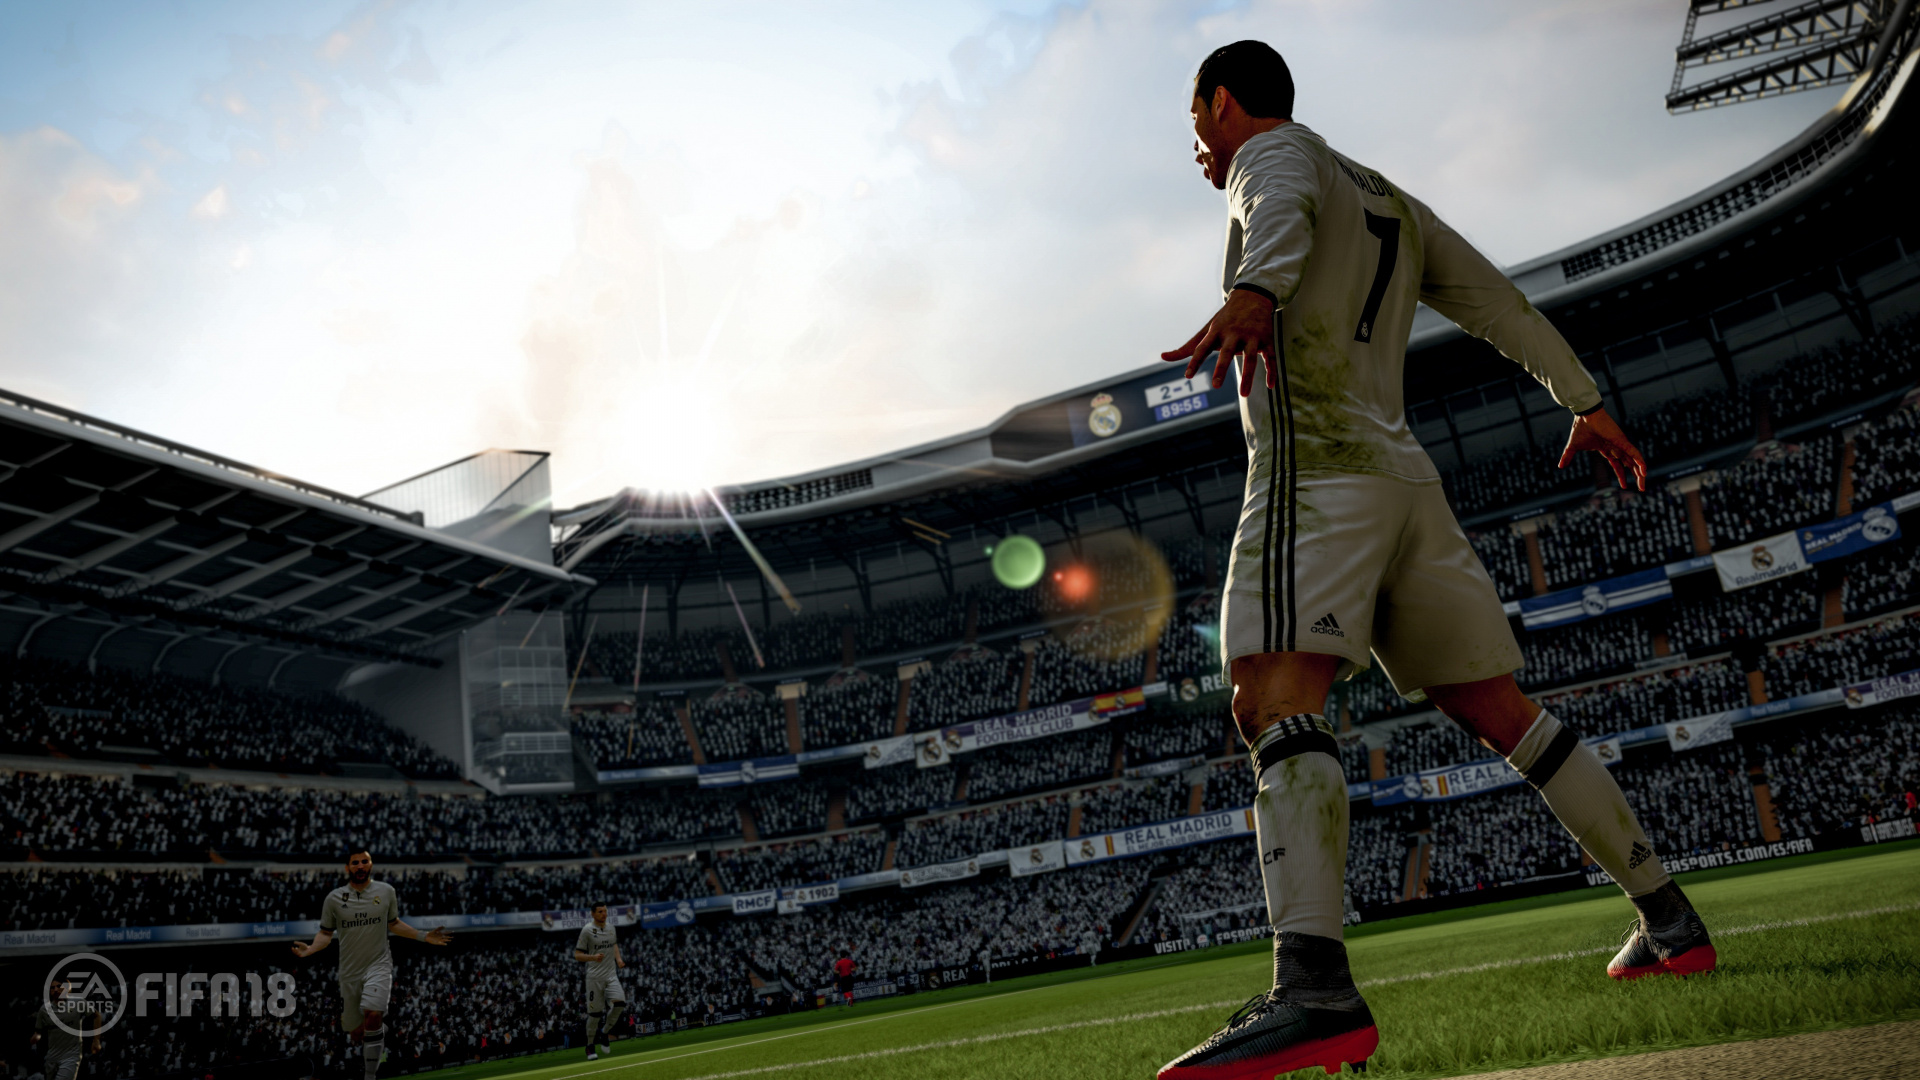 FIFA 18, ea Sports, Electronic Arts, Sports Venue, Stadion. Wallpaper in 1920x1080 Resolution